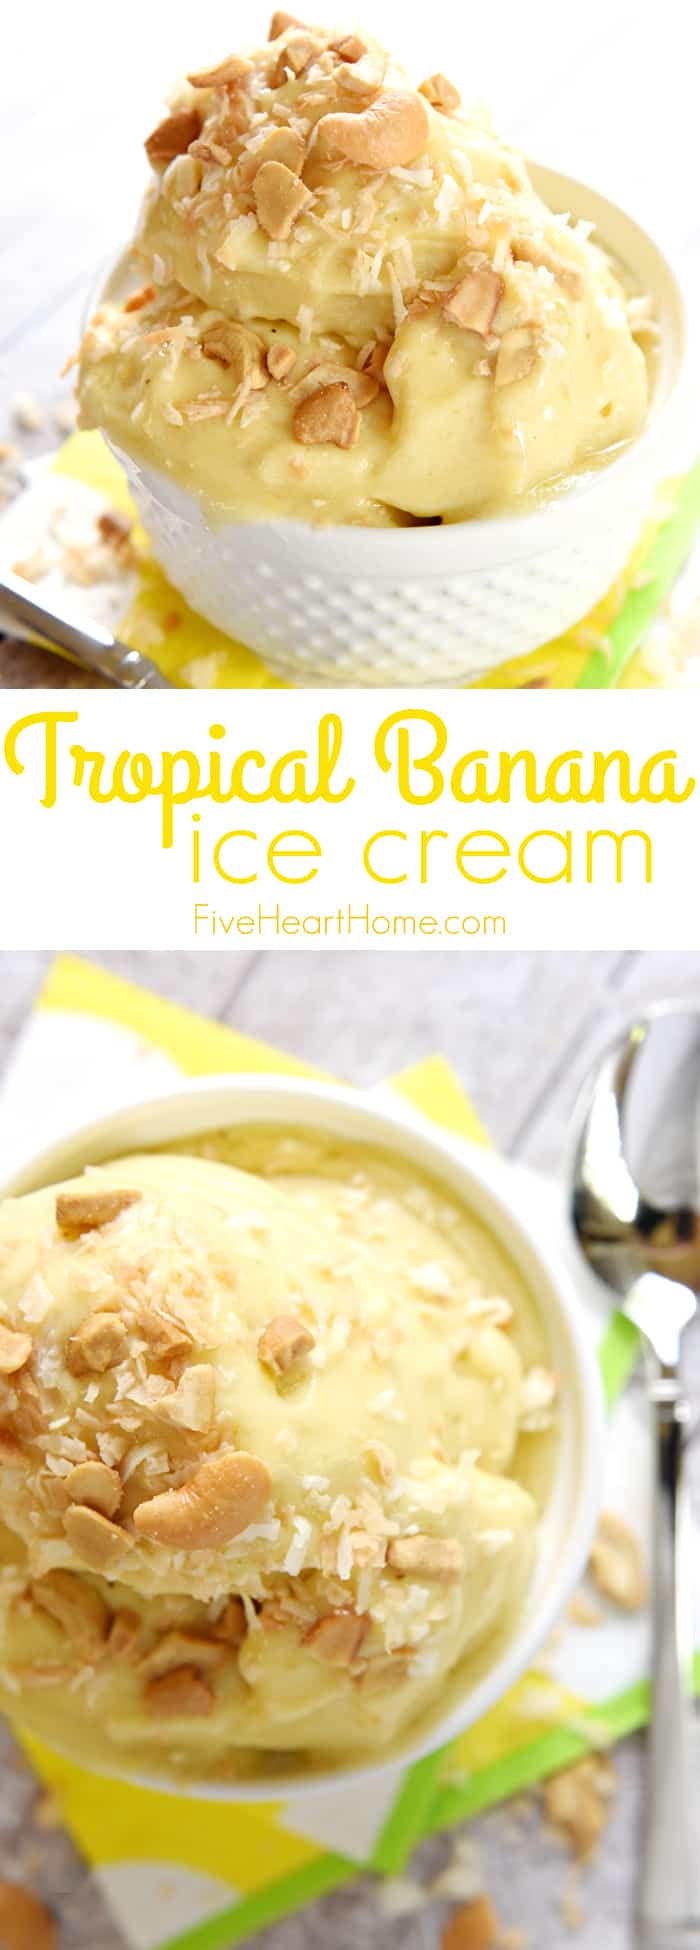 Tropical Banana "Ice Cream" ~ features frozen bananas, pineapple, and mango whipped to an ice cream-like consistency for an all-natural, all-fruit treat with no added sugar...decadent enough for dessert yet healthy enough for breakfast! | FiveHeartHome.com via @fivehearthome